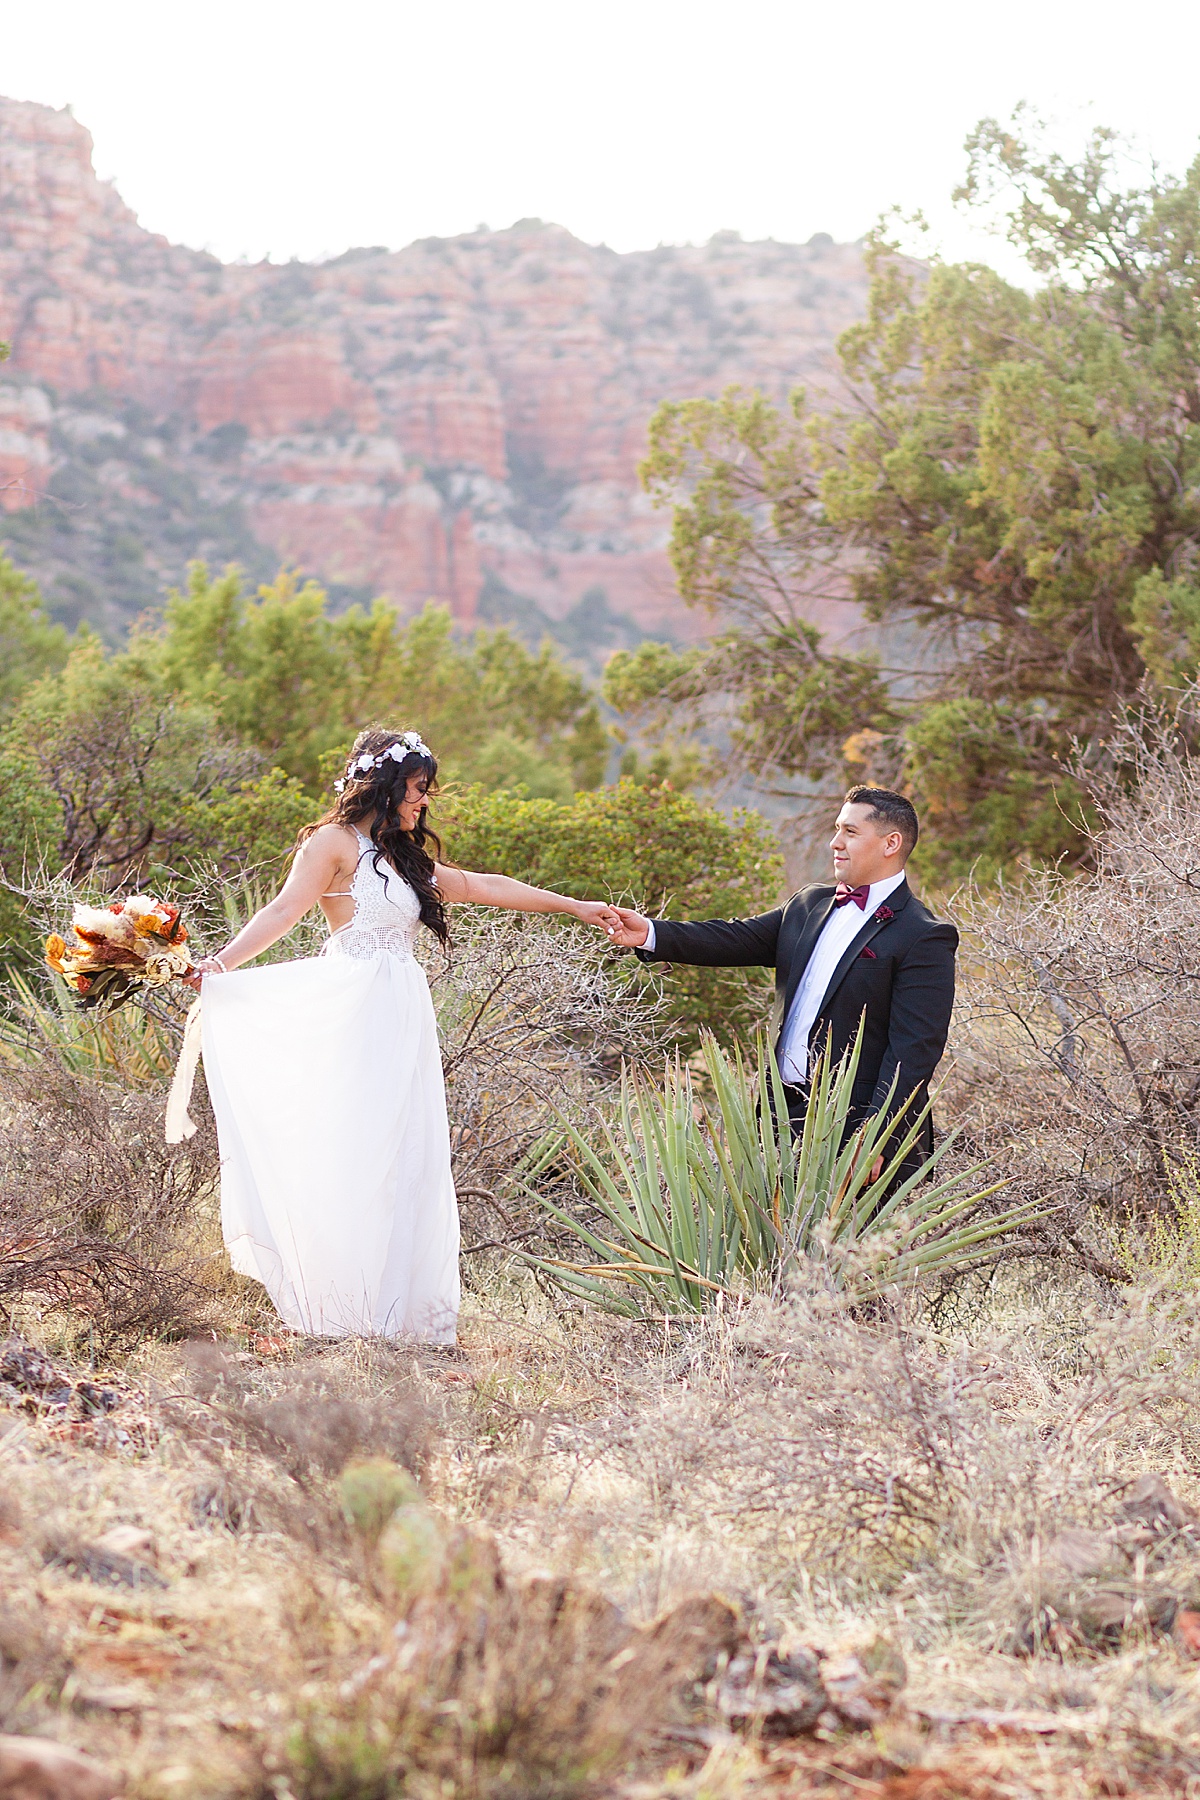 Husband leading wife down the trail surrounded by the stunning red rocks in Sedona.